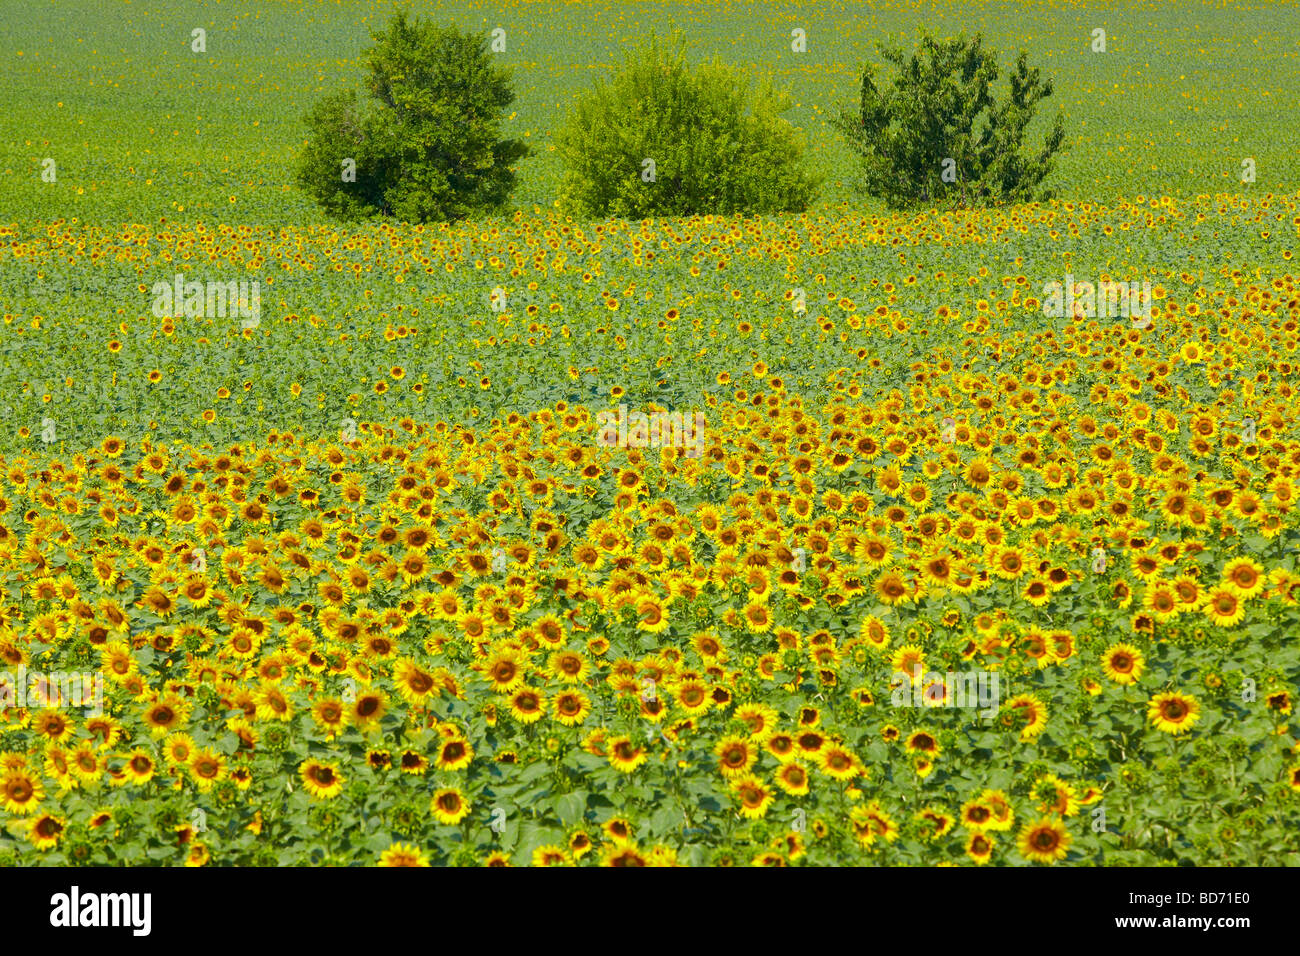 Sunflowers, southern France, France, Europe Stock Photo